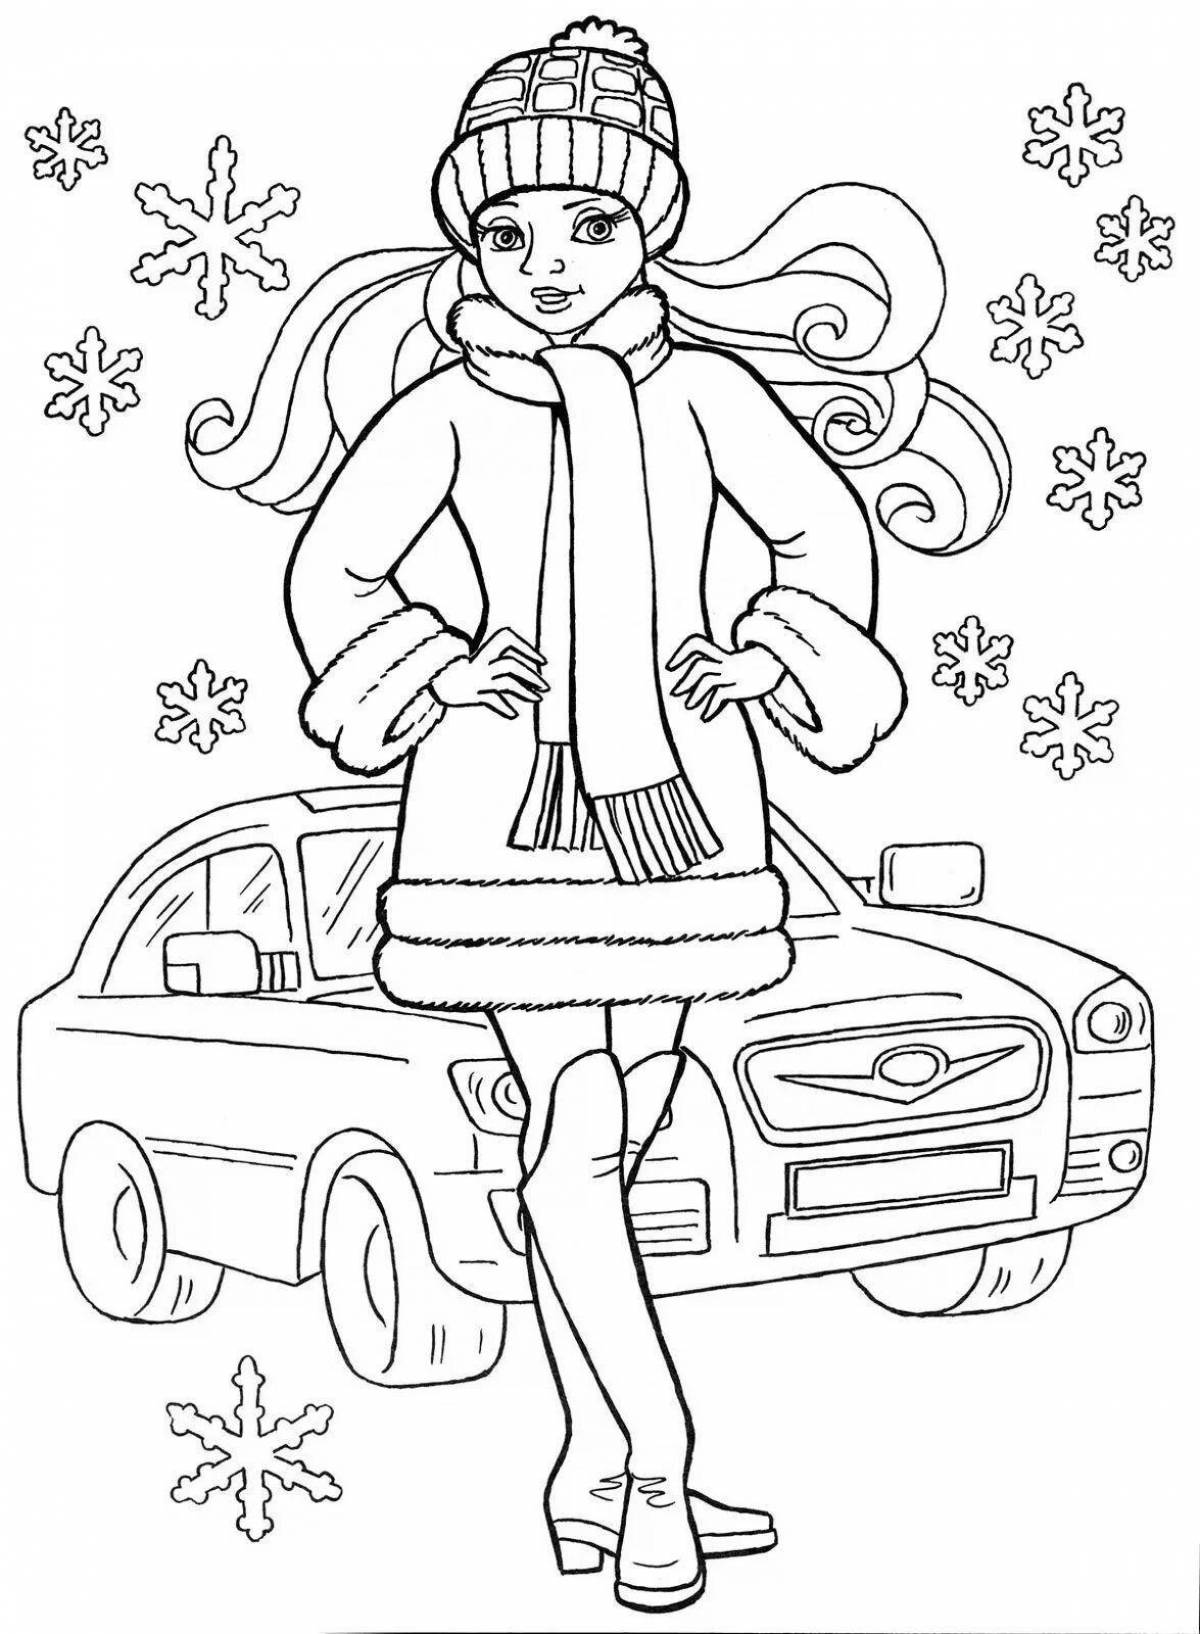 Magical winter coloring for girls